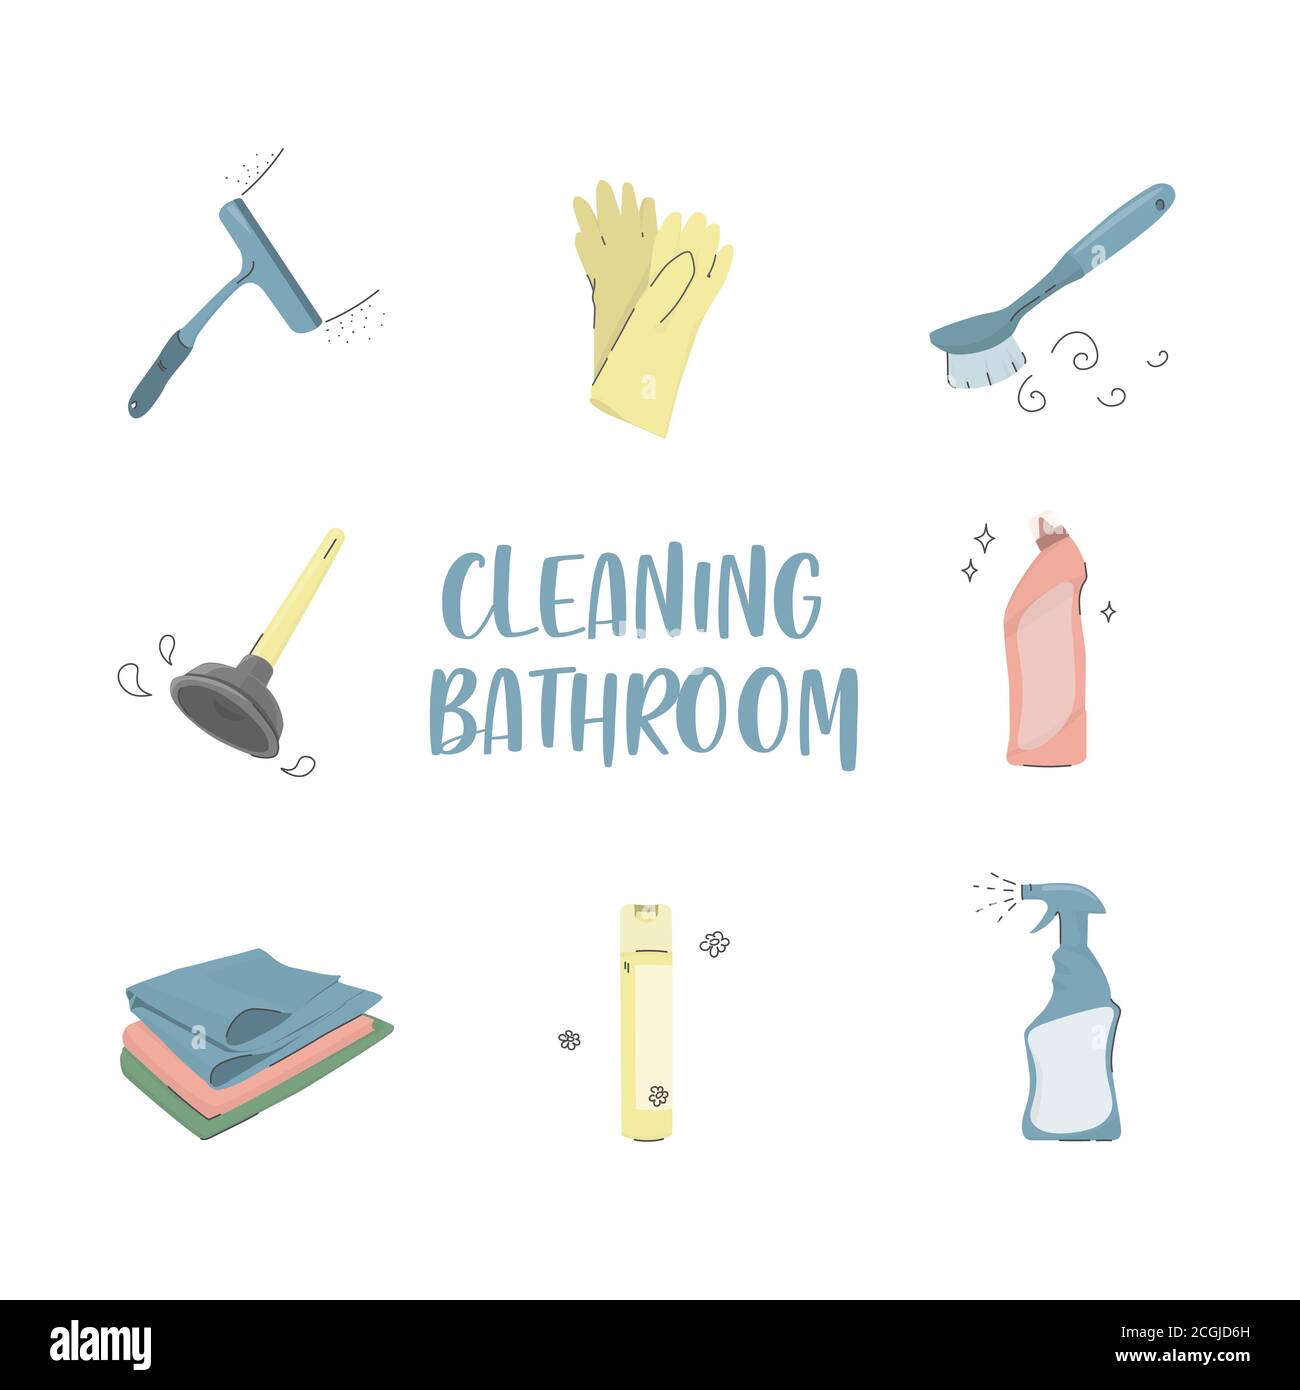 https://c8.alamy.com/comp/2CGJD6H/bathroom-cleaning-set-of-vector-color-icons-of-cleaning-tools-2CGJD6H.jpg